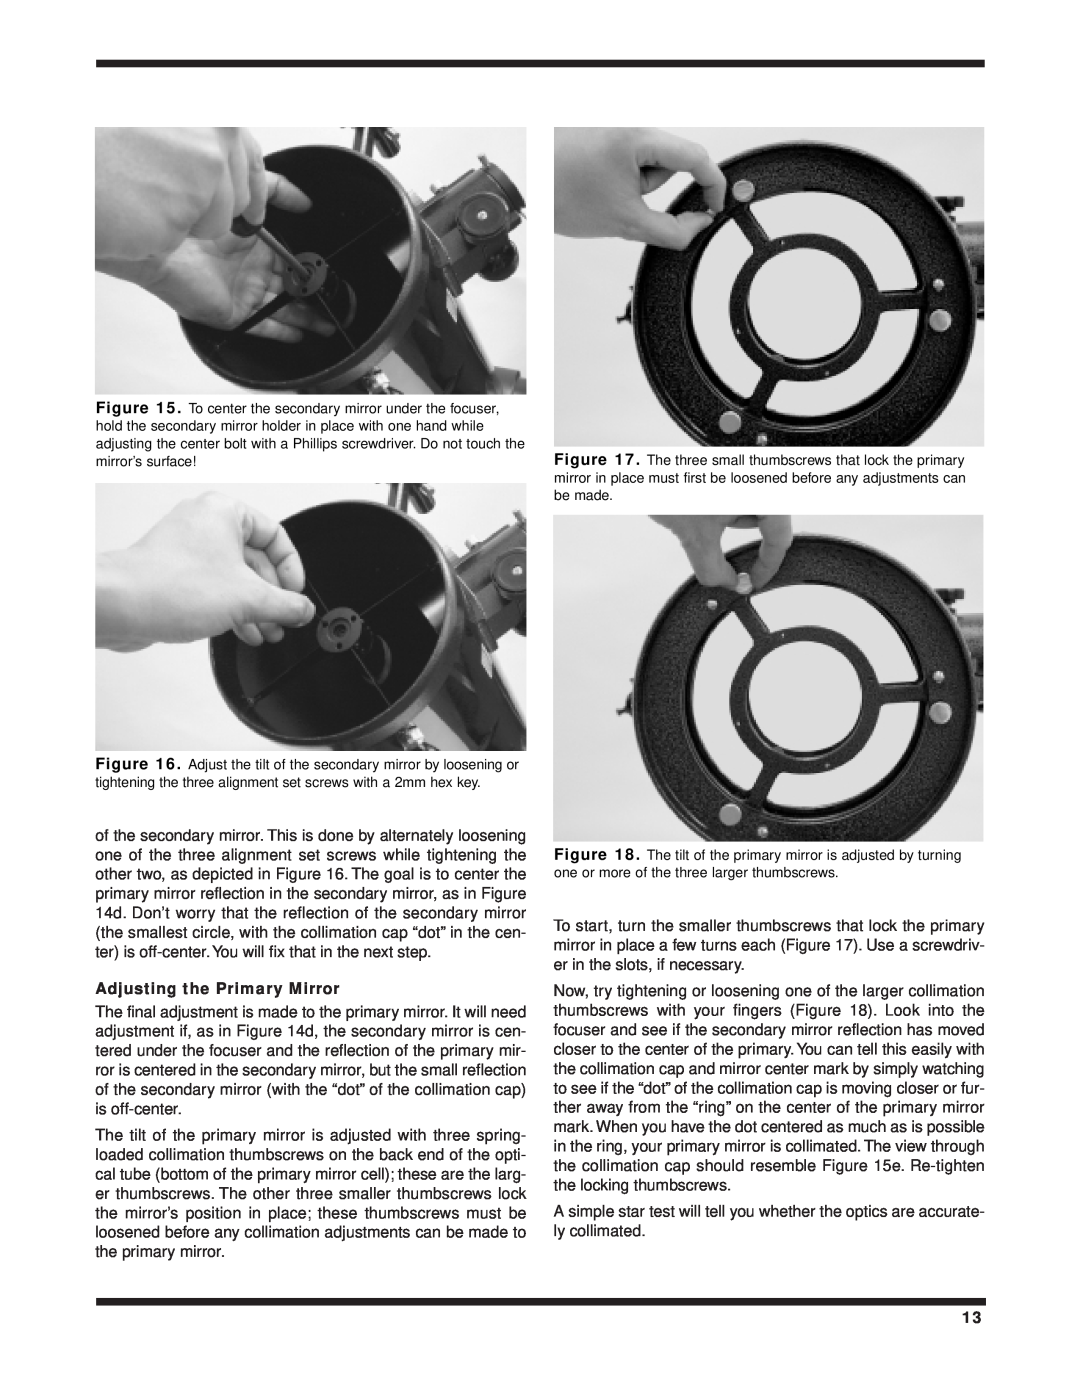 Orion 8 EQ instruction manual Adjusting the Primary Mirror 